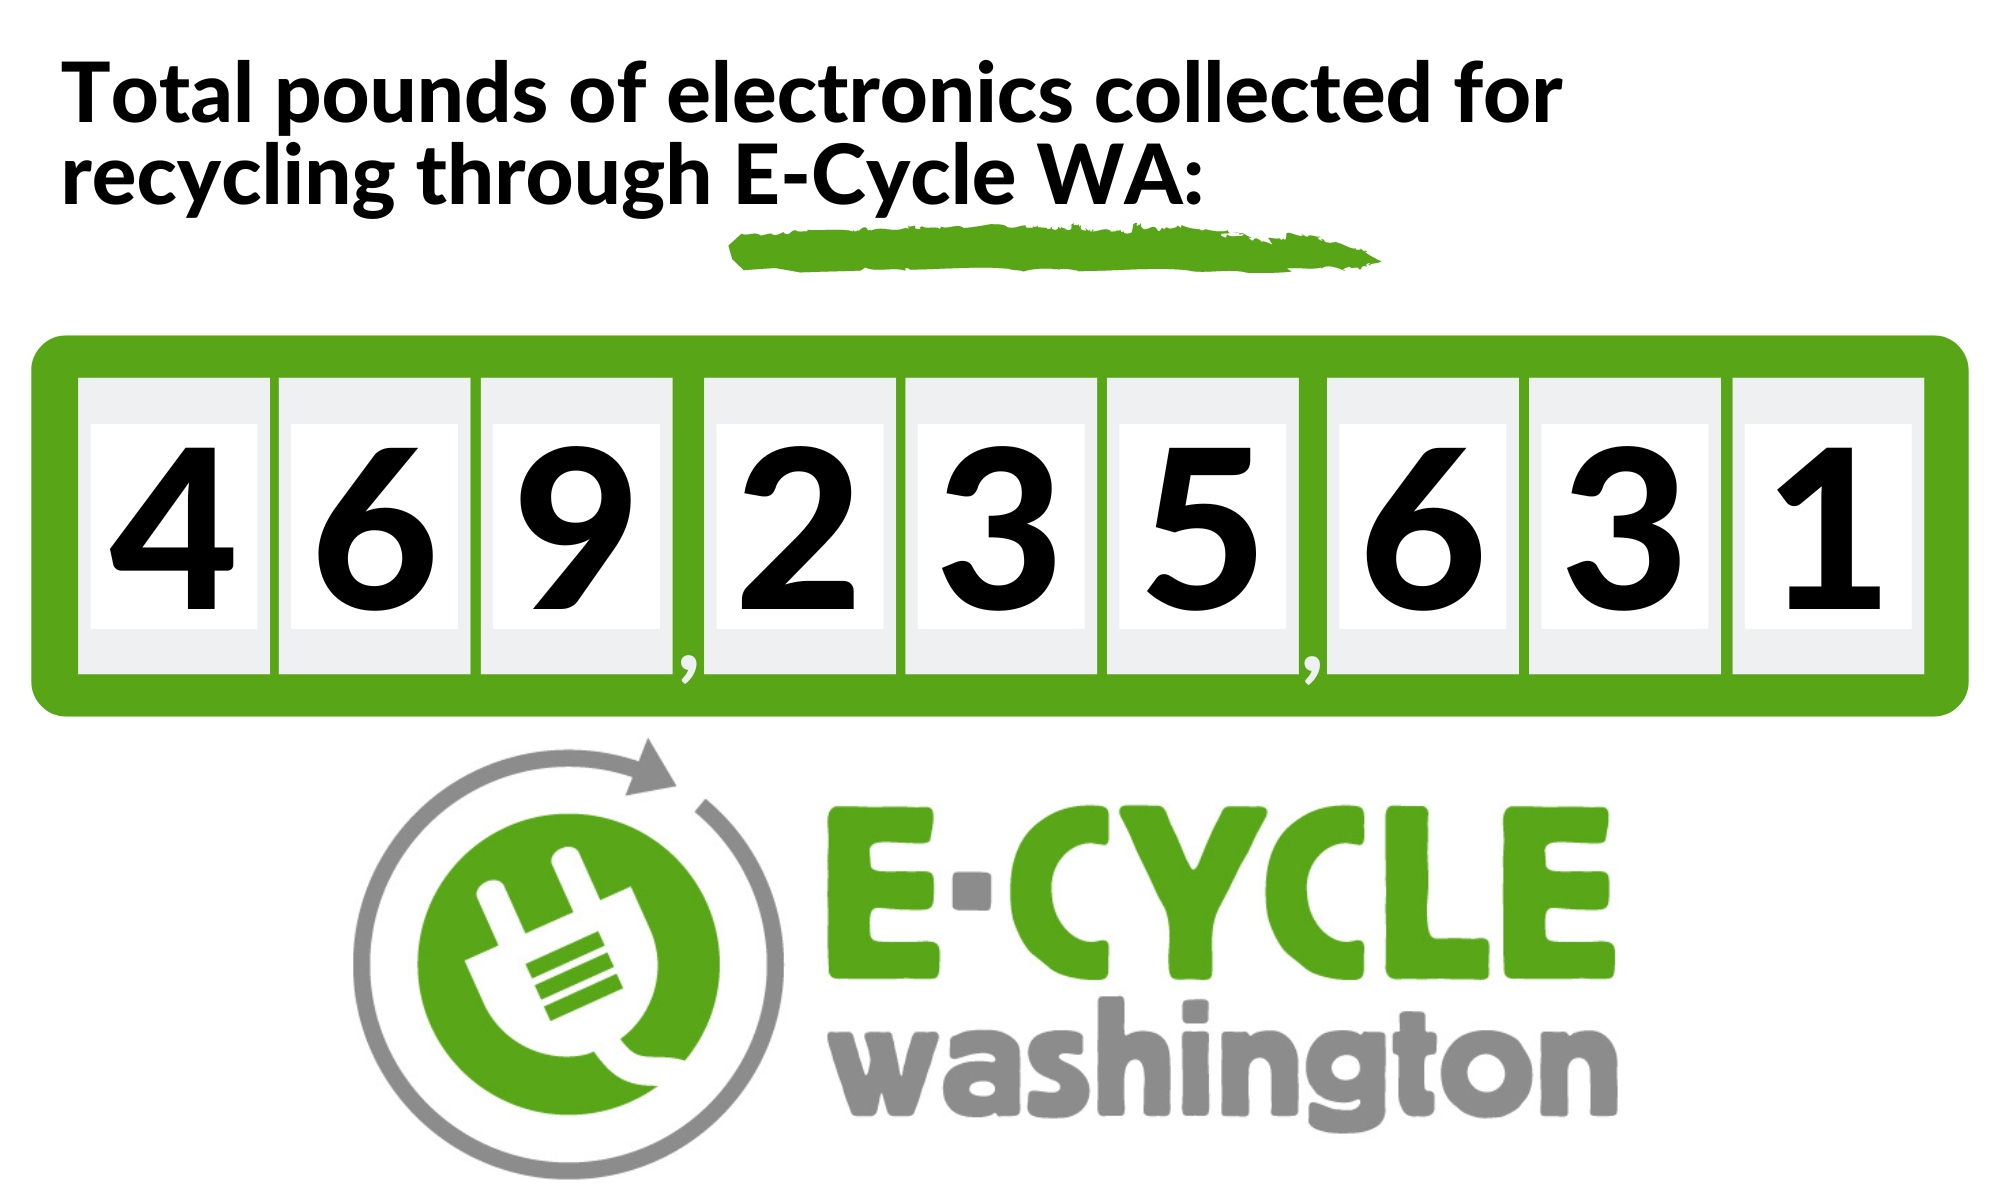 E-Cycle Washington has collected a total of 419,962,778 pounds of electronic material for recycling.